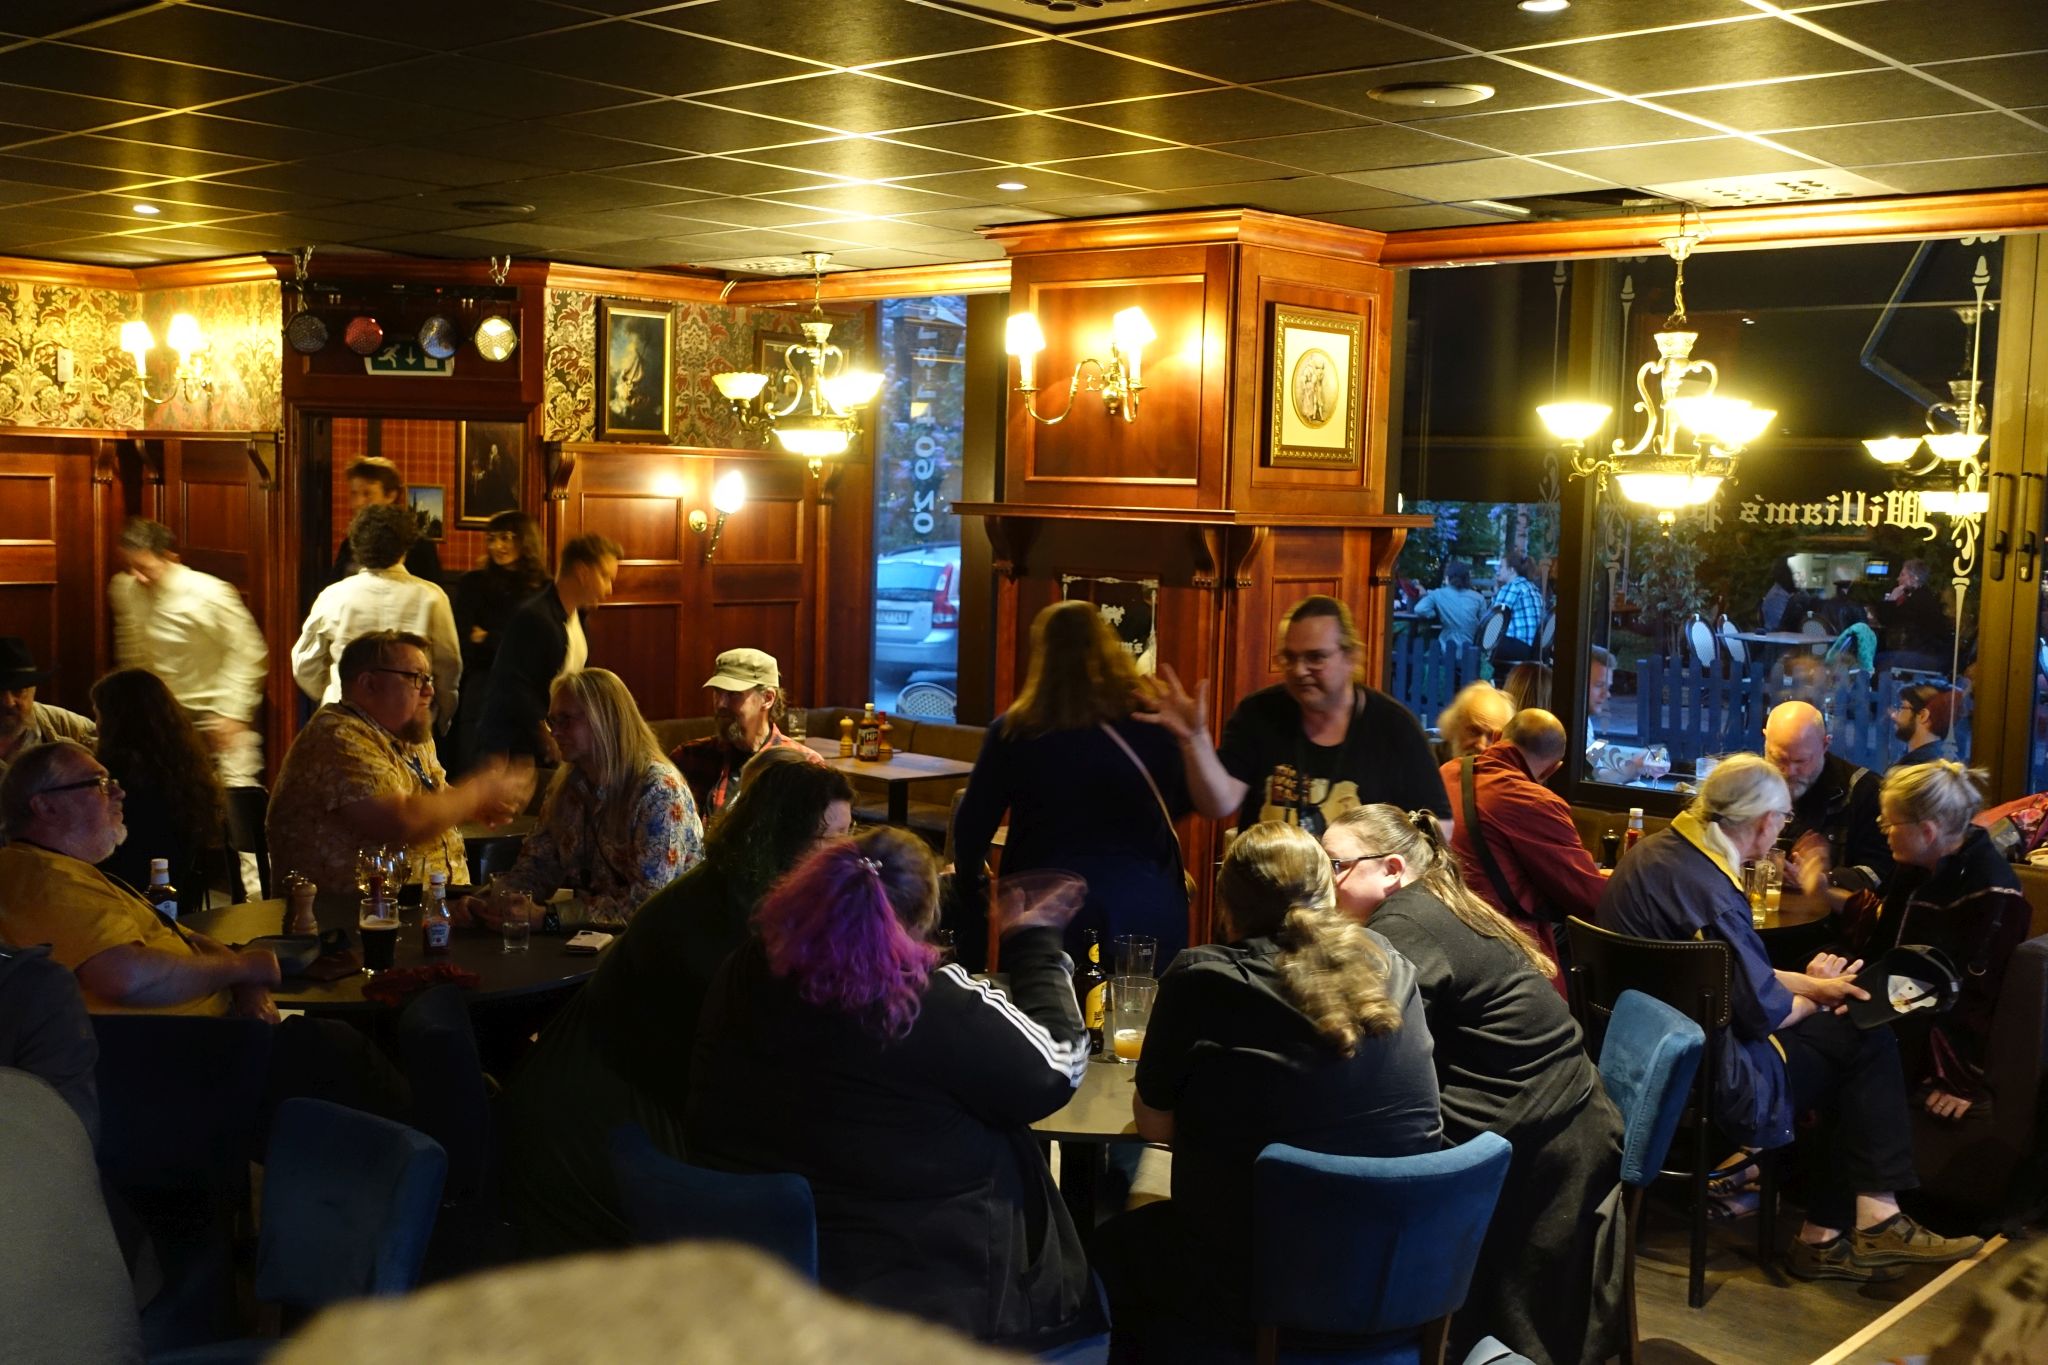 Interior of the pub. There are many people sitting and standing. The walls are wooden and there are big windows. Outside there are more tables and people sit around them.